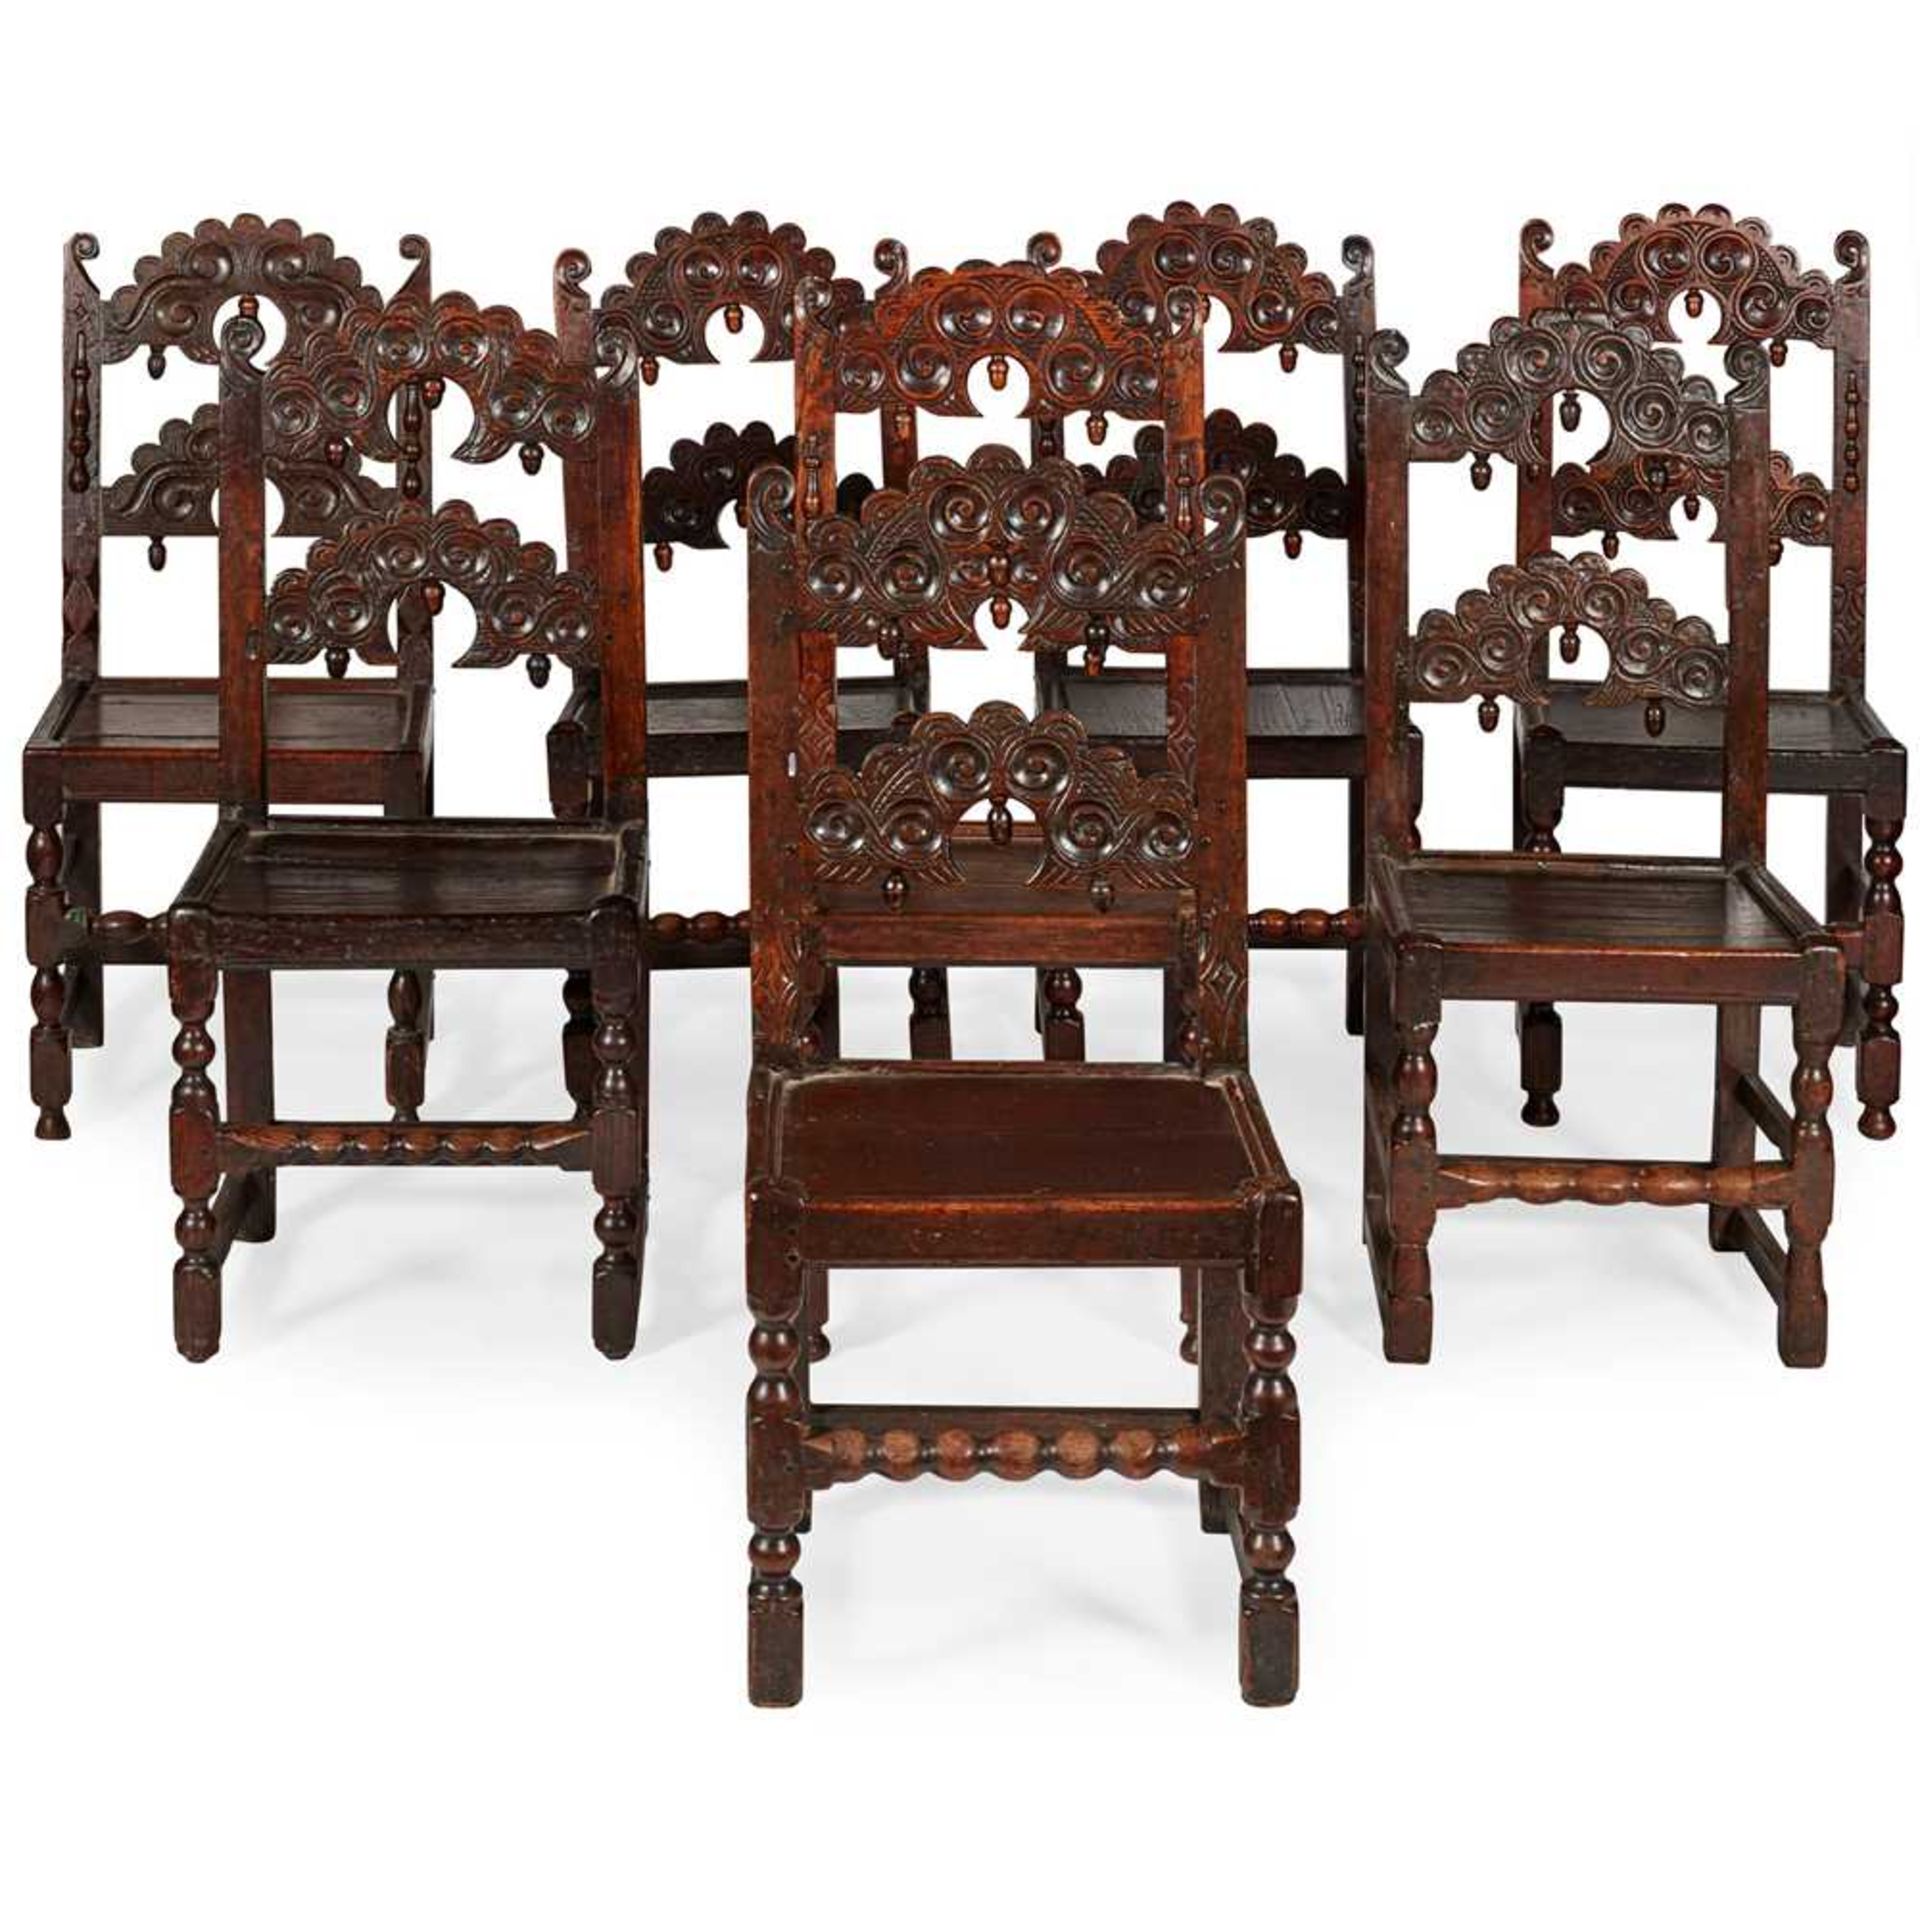 MATCHED SET OF EIGHT 17TH CENTURY STYLE CARVED OAK DINING CHAIRS, PROBABLY YORKSHIRE 19TH CENTURY - Image 2 of 2